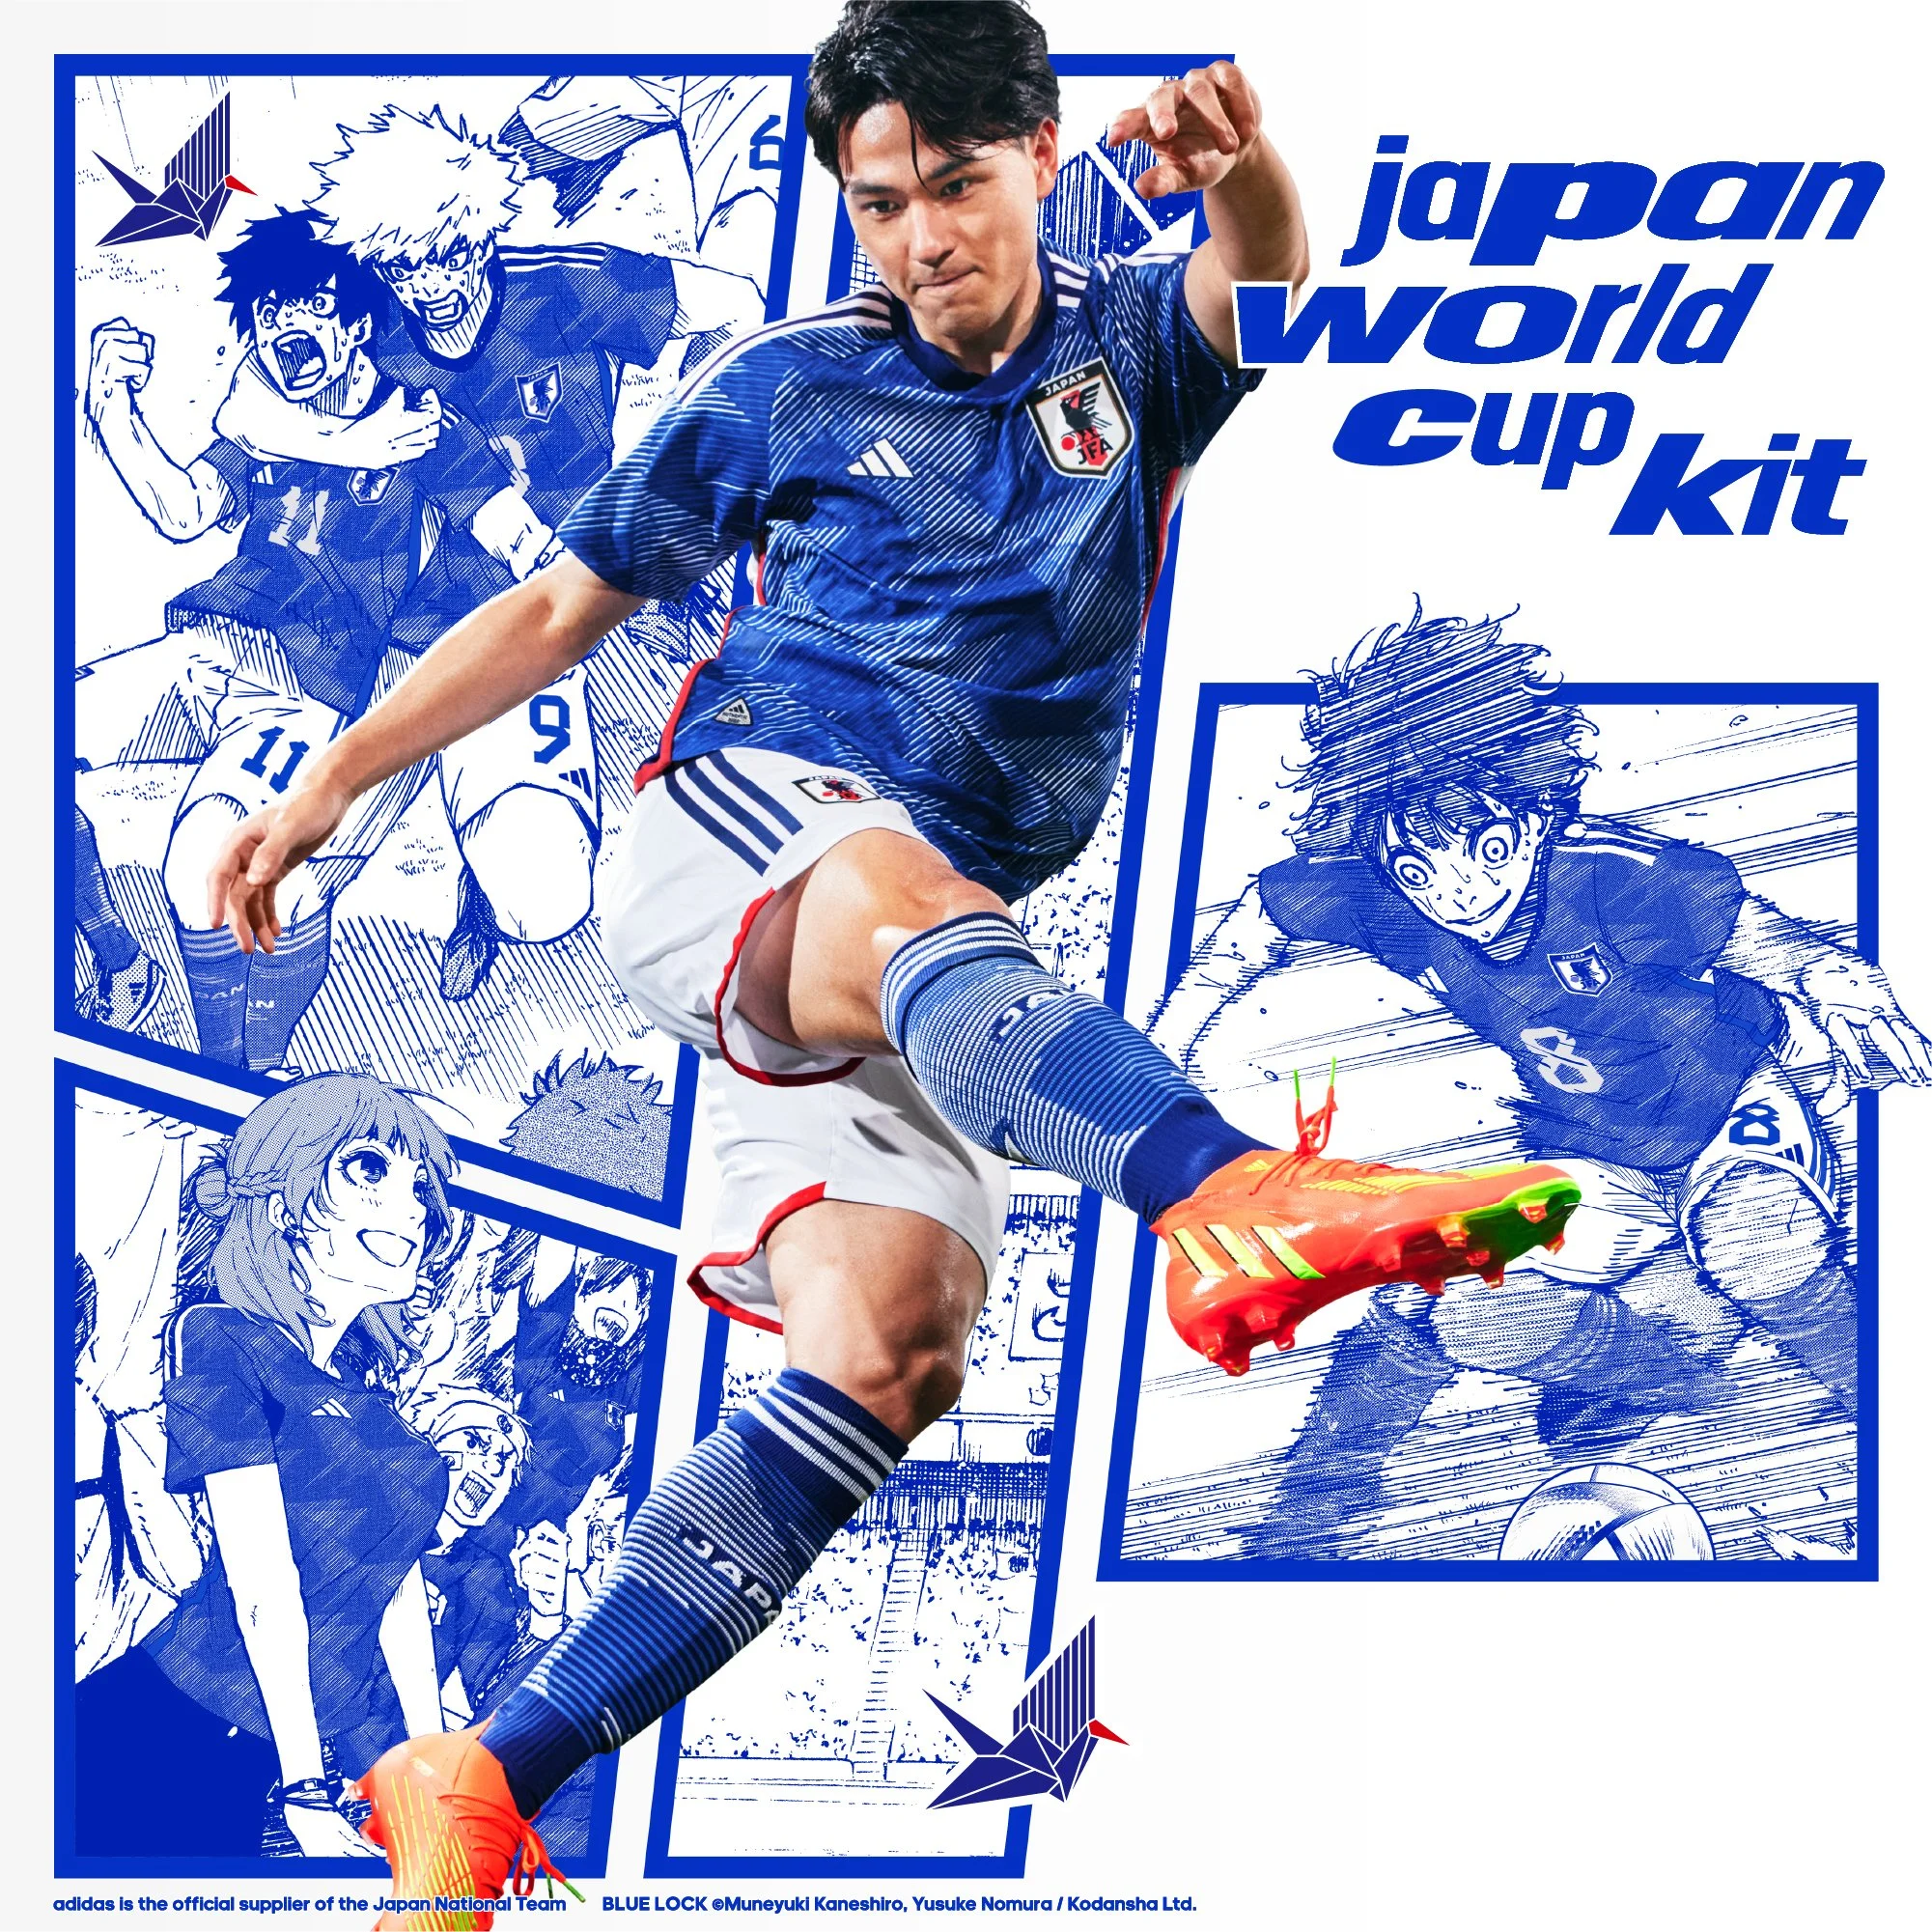 The Power of Anime, Blue Lock, and Japan's World Cup Home Kit